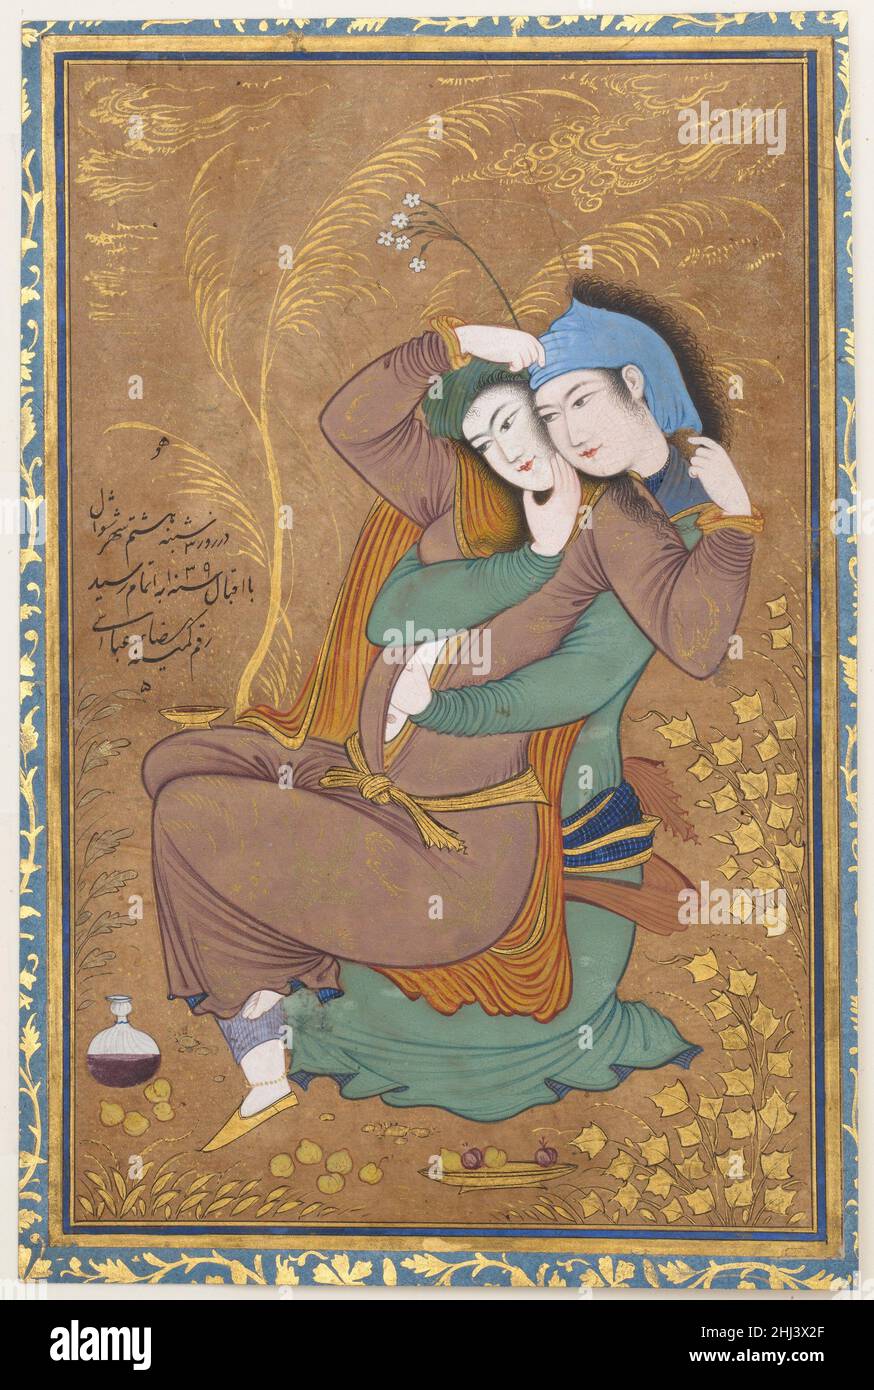 The Lovers dated A.H. 1039/ A.D. 1630 Painting by Riza-yi 'Abbasi The artist Riza‑yi 'Abbasi revolutionized Persian painting and drawing with his inventive use of calligraphic line and unusual palette. He painted The Lovers toward the end of a long, successful career at the Safavid court. The subject of a couple entwined reflects a newly relaxed attitude to sensuality introduced in the reign of Shah Safi (r. 1629–42). Here the figures are inextricably bound together, merged volumes confined within one outline.. The Lovers  451023 Stock Photo